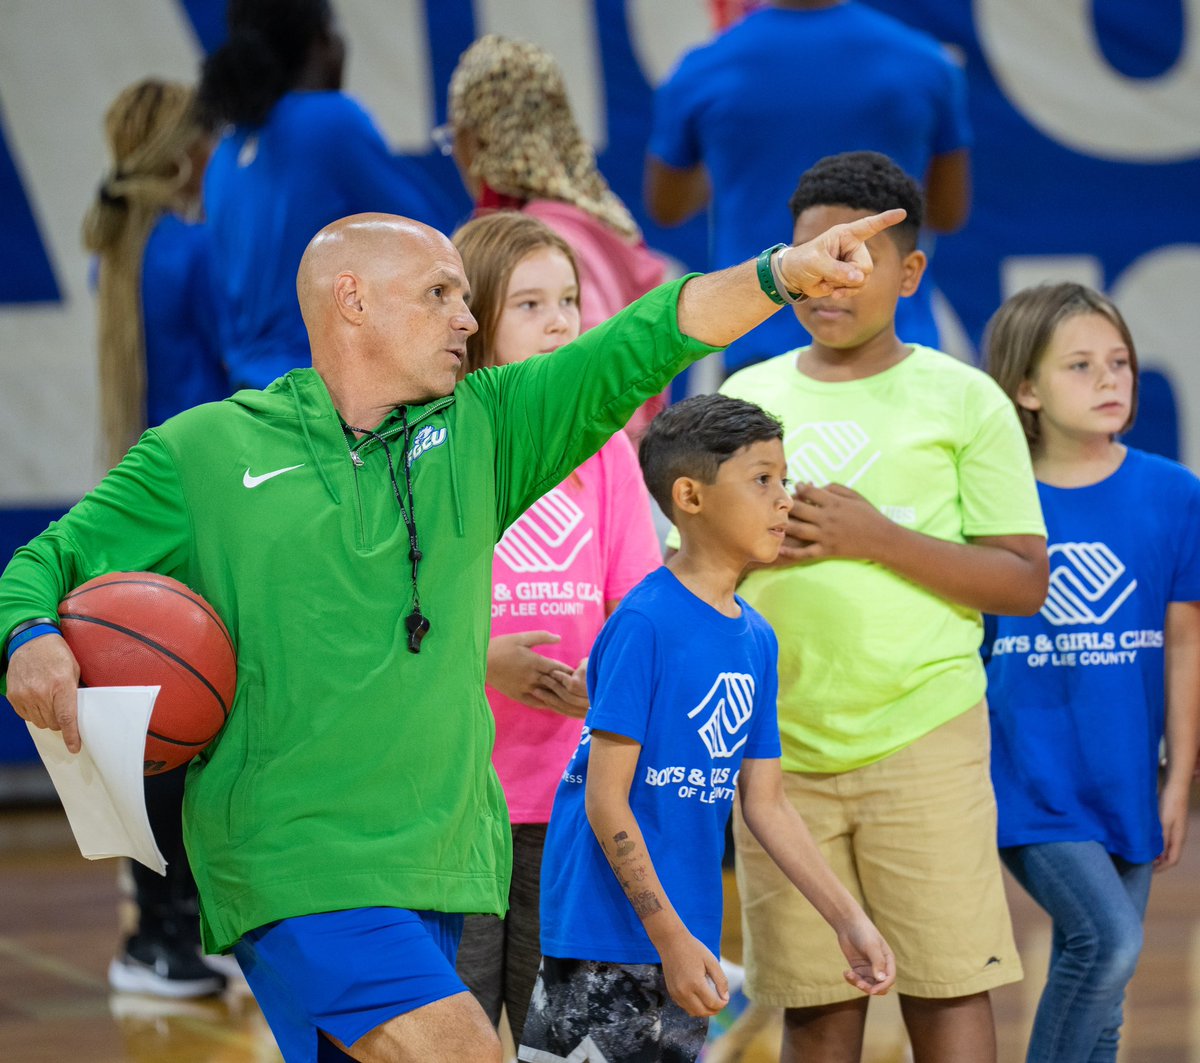 Molding the next generation of leaders Thank you to the Boys & Girls Club for coming out to The Nest to hoop with the Eagles ‼️ #DunkCity | #Attitude | #FGCU 🦅🌴🤙